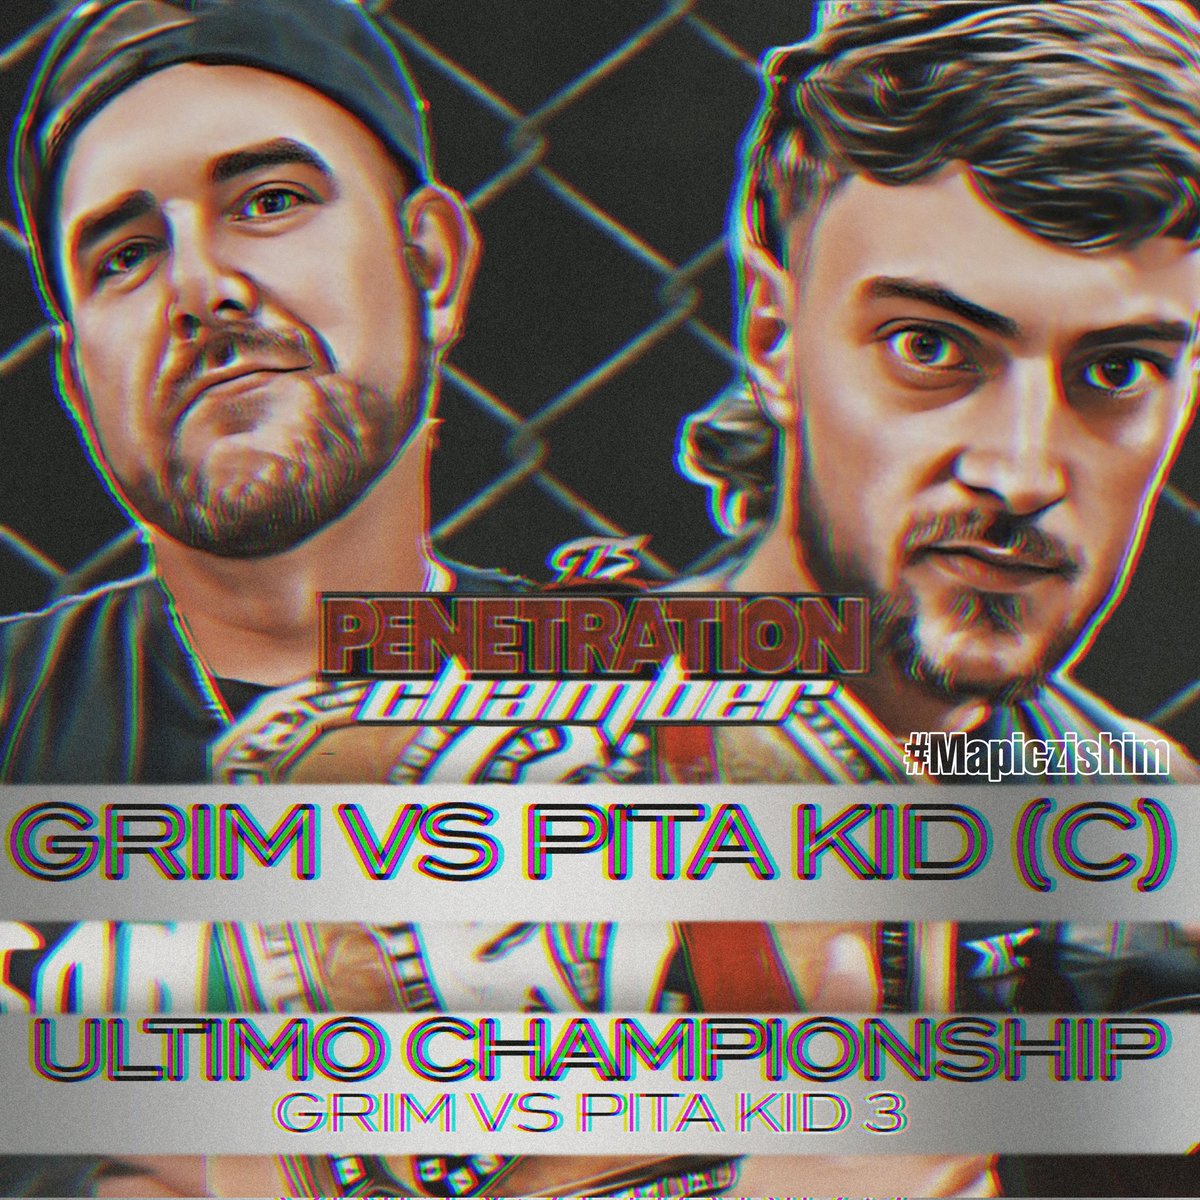 Grim Vs Pita Kid III 
Steel Cage For The Ultimo Title!

Who Hyped For This Match!
@GrimsToyShow @ChrisFicsor